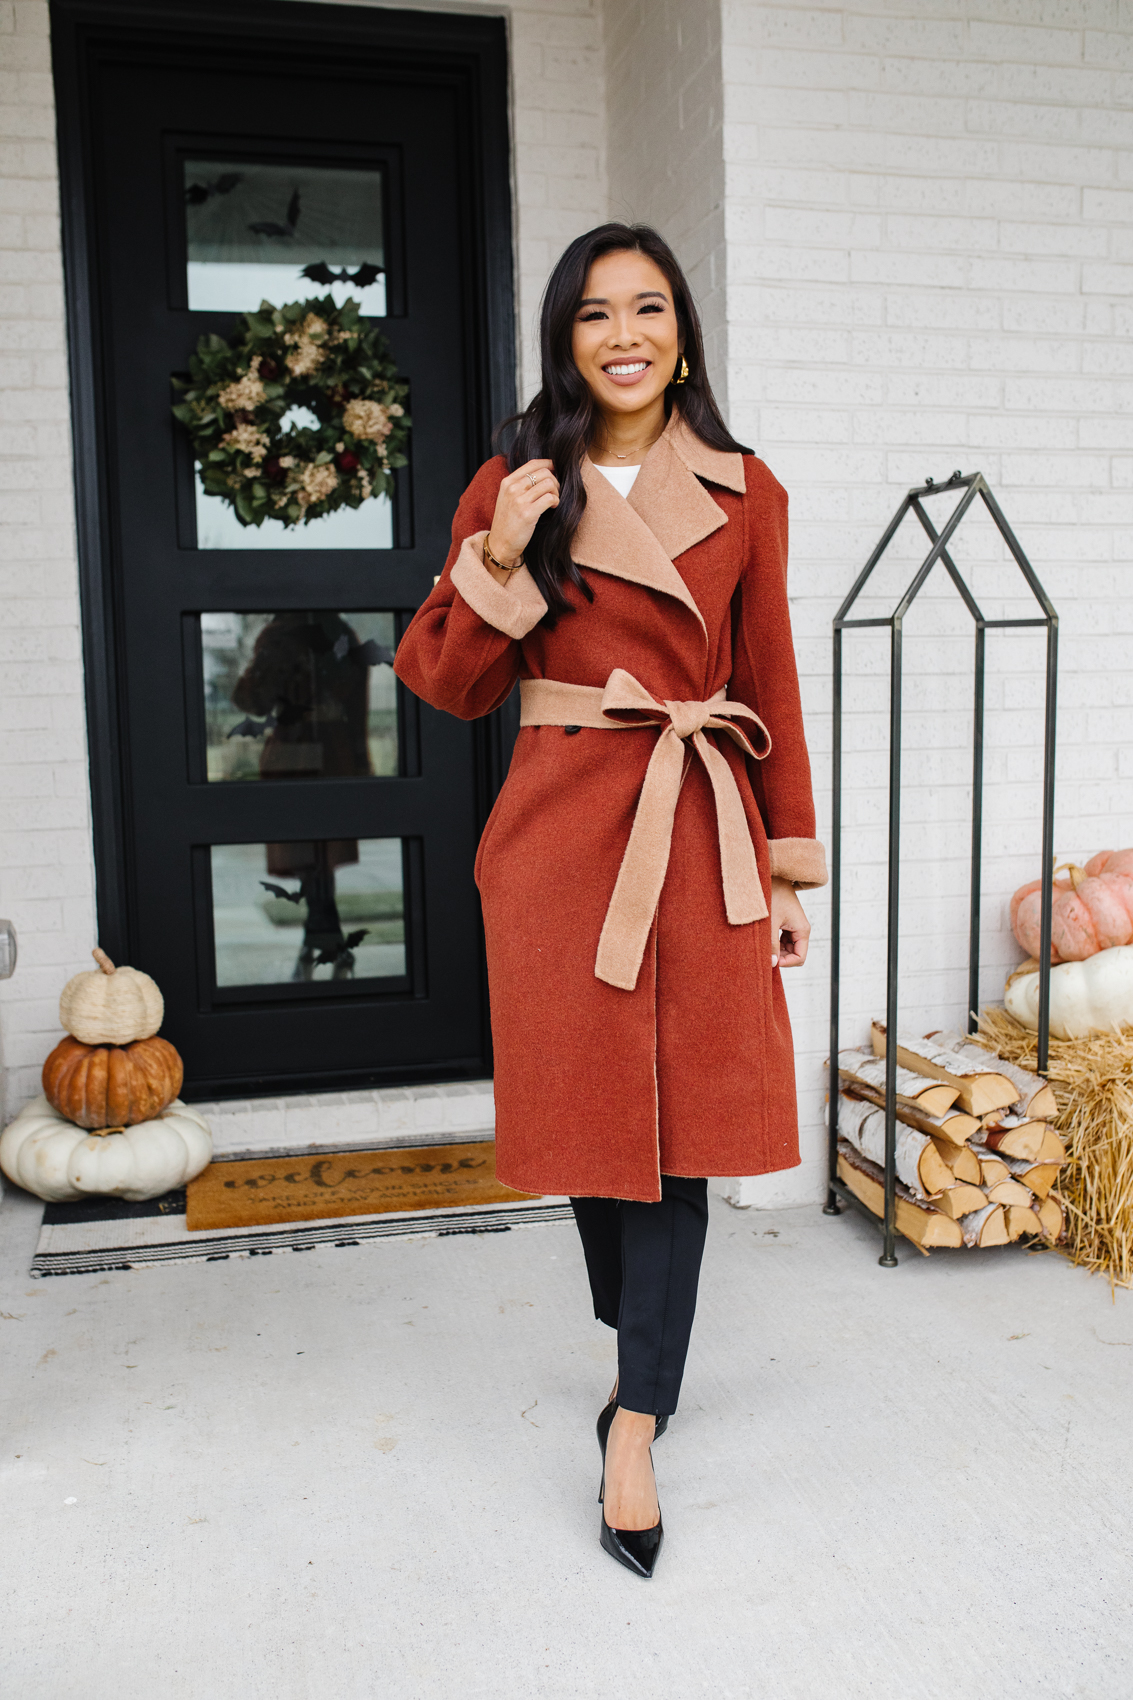 HKCung wearing a reversible wool coat by M.M.LaFleur for fall outfits with black pants and heels